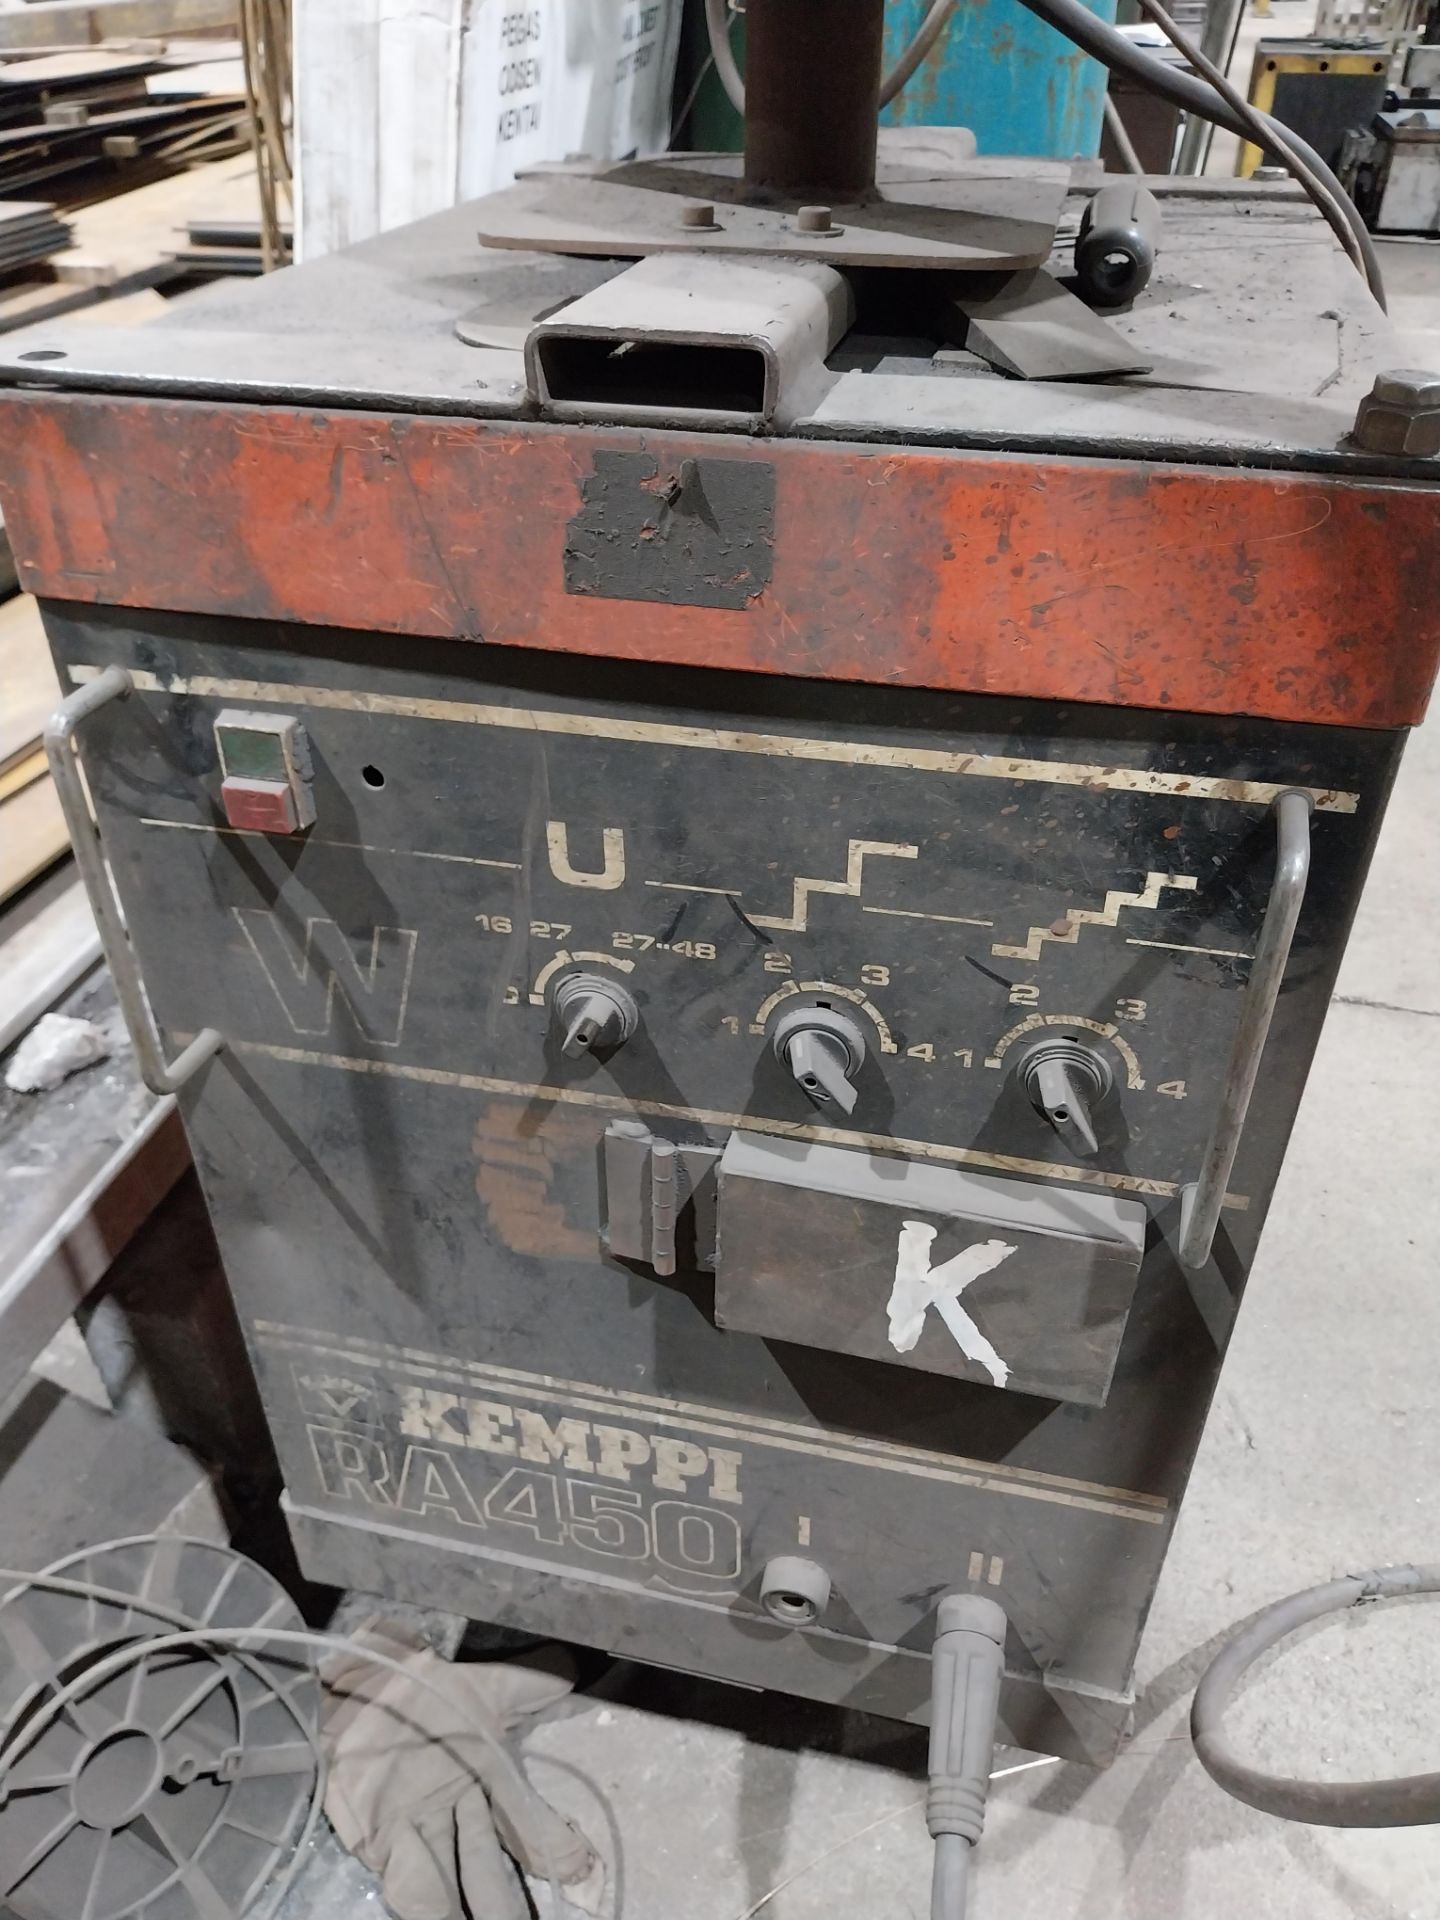 Kempp RA450 mig welder with F40 wire feed, torch and clamp (bottle not included) - Bild 3 aus 7